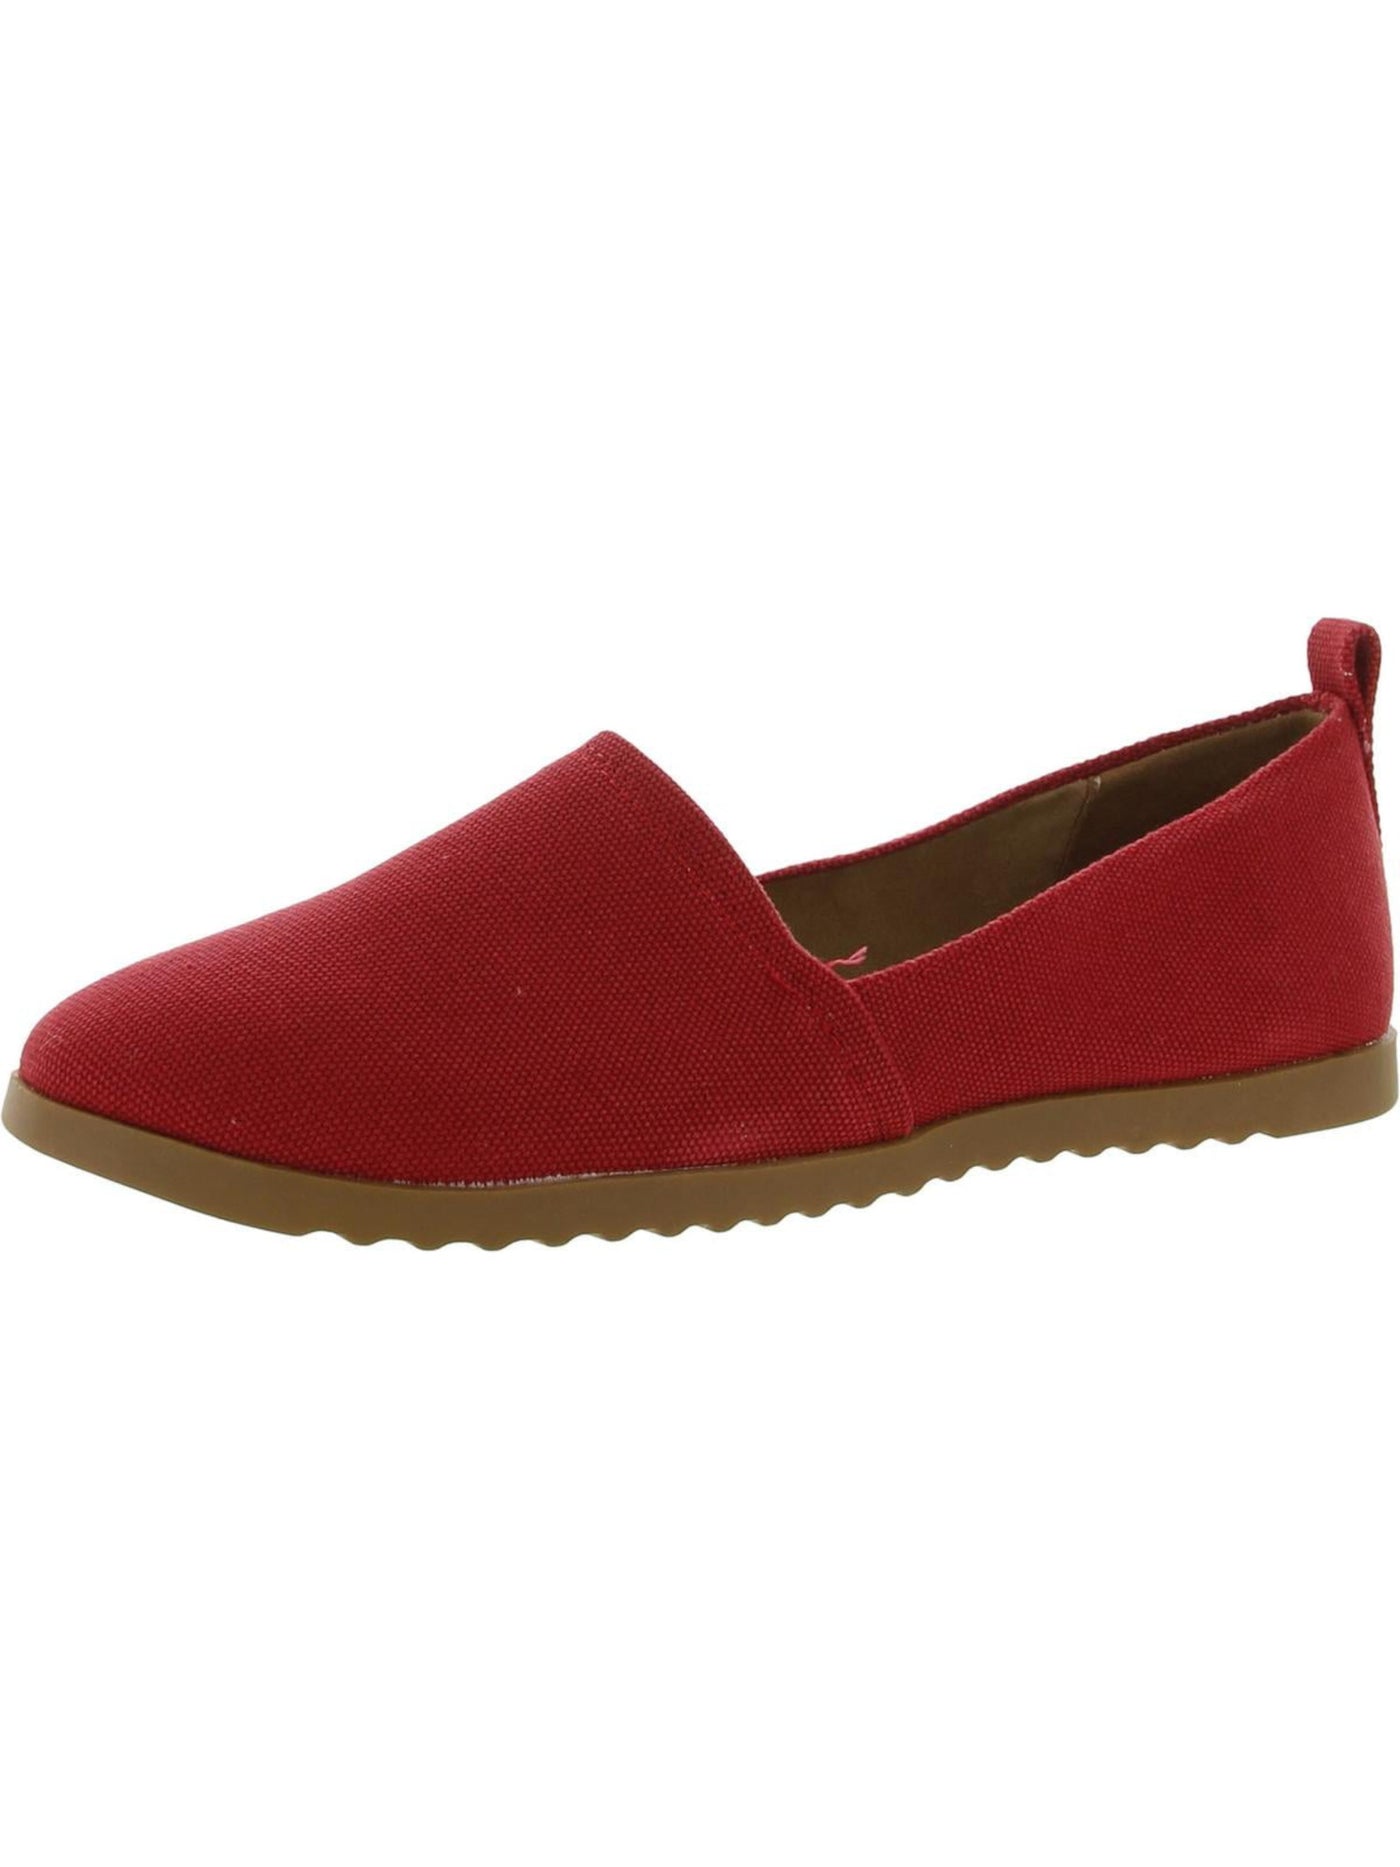 STYLE & COMPANY Womens Red Cushioned Nouraa Round Toe Slip On Flats Shoes 6.5 M